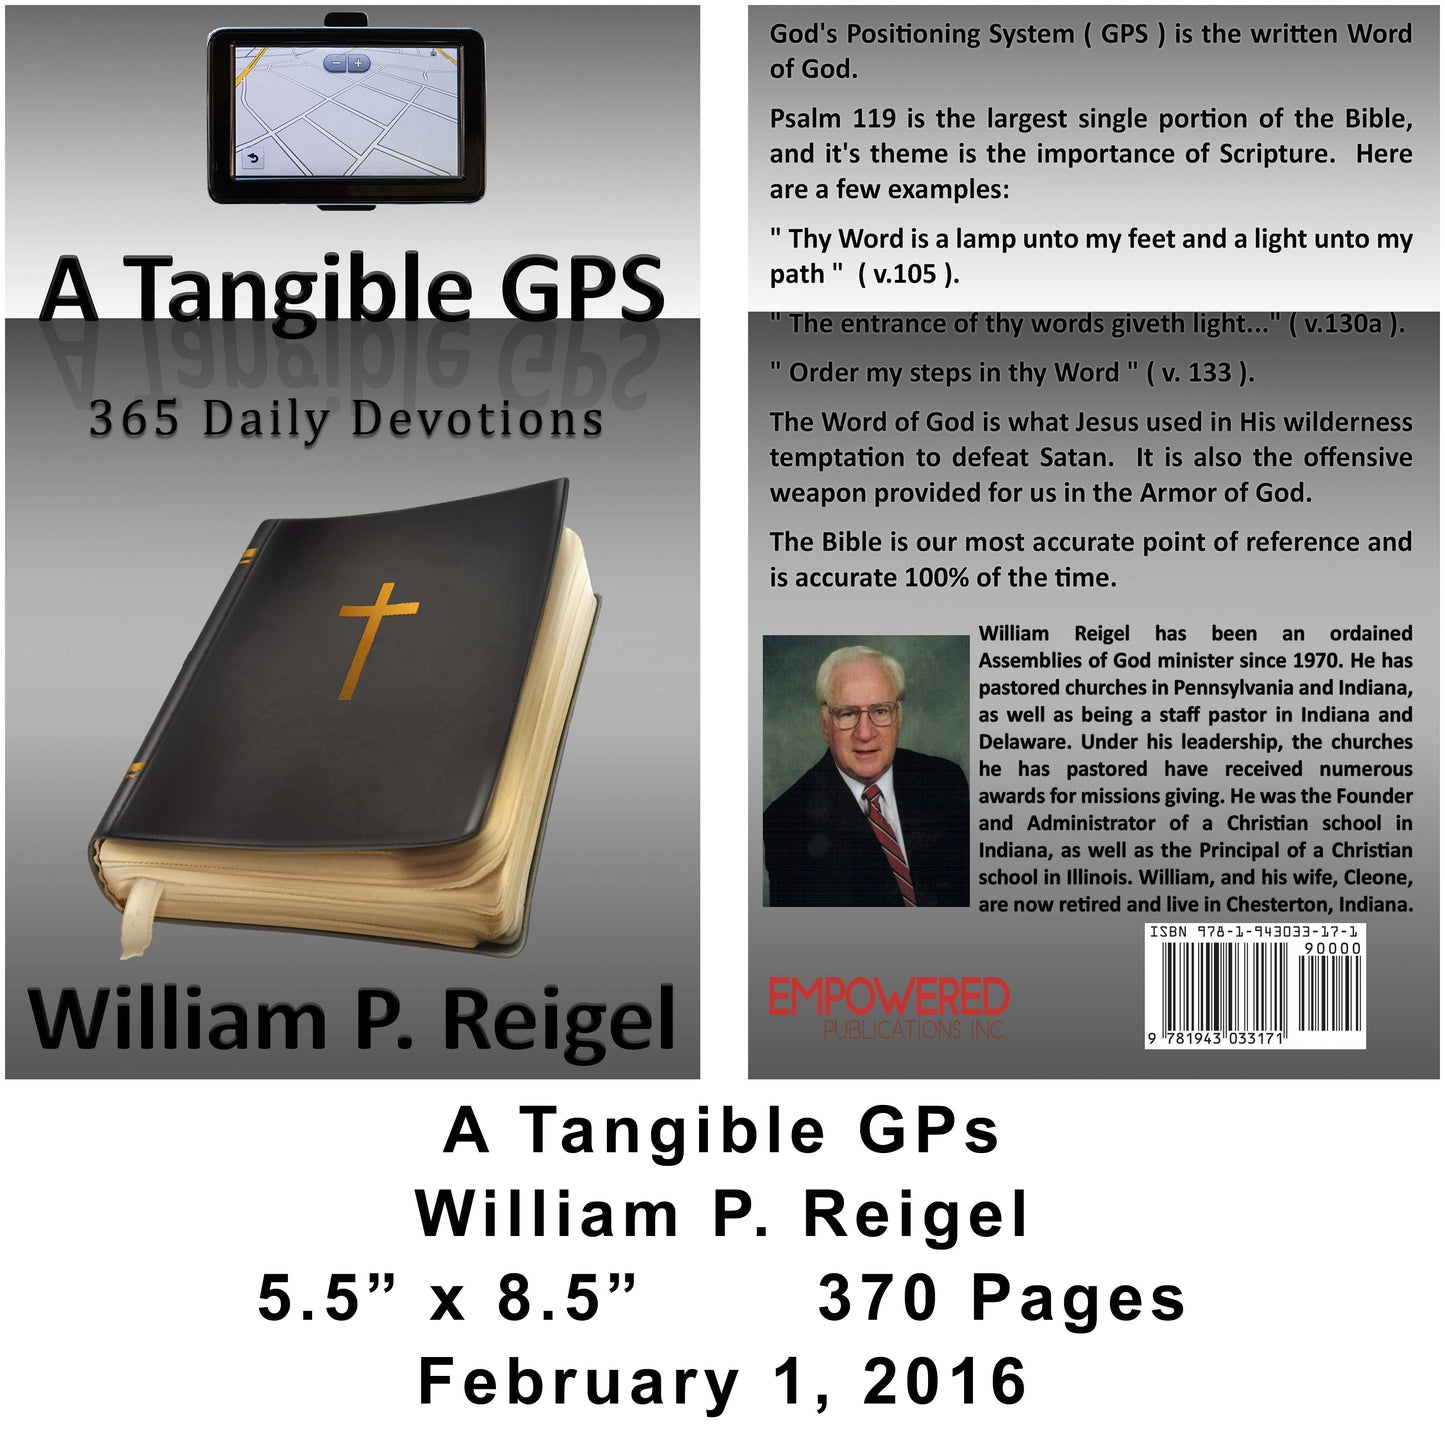 A Tangible GPS